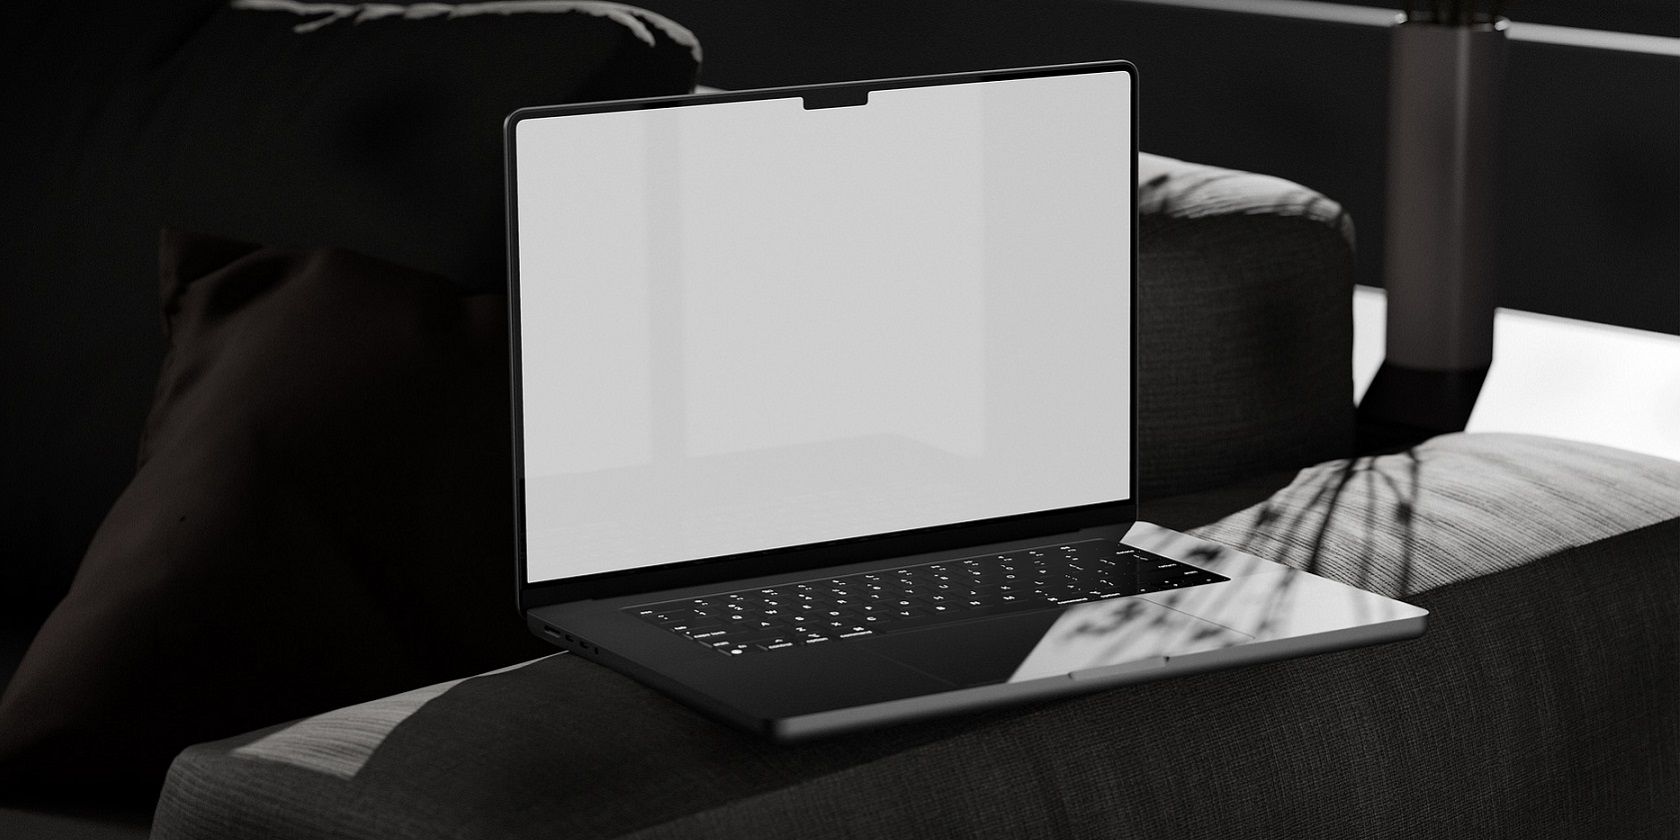 A black-and-white laptop image